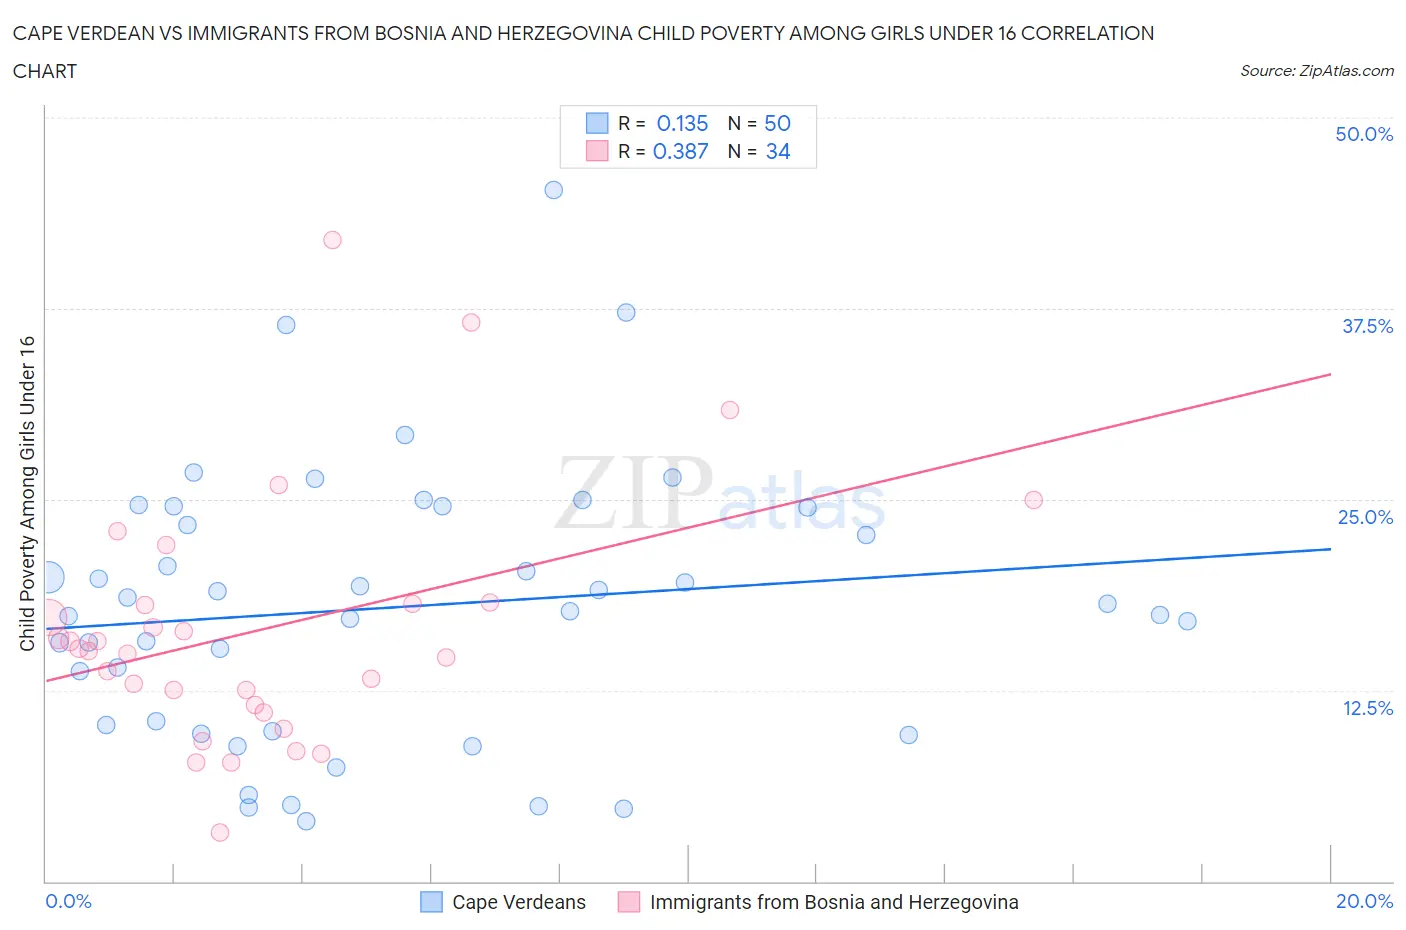 Cape Verdean vs Immigrants from Bosnia and Herzegovina Child Poverty Among Girls Under 16